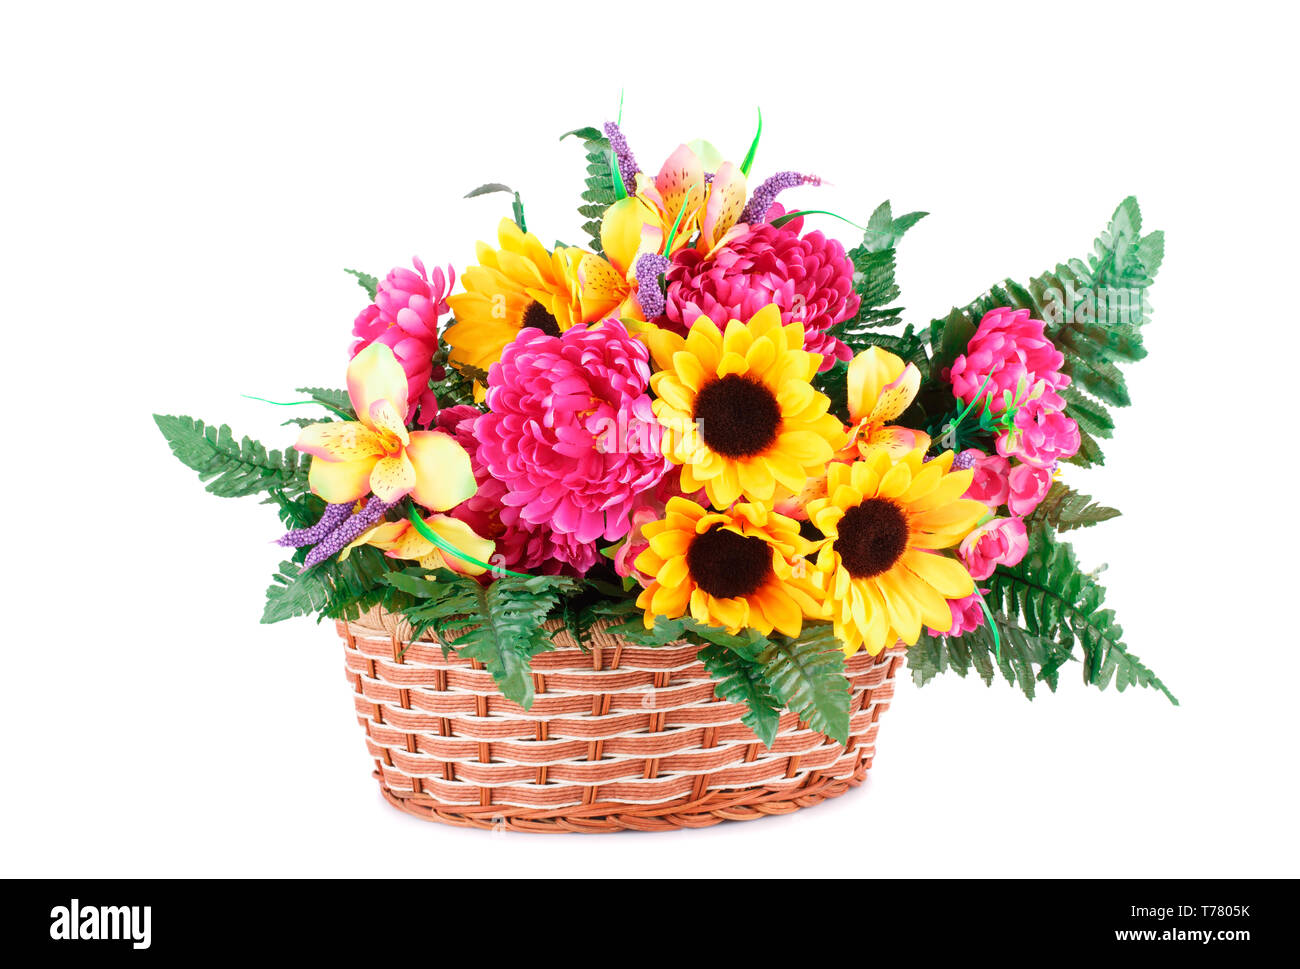 Colorful fabric flowers in wicker basket isolated on white background. Stock Photo